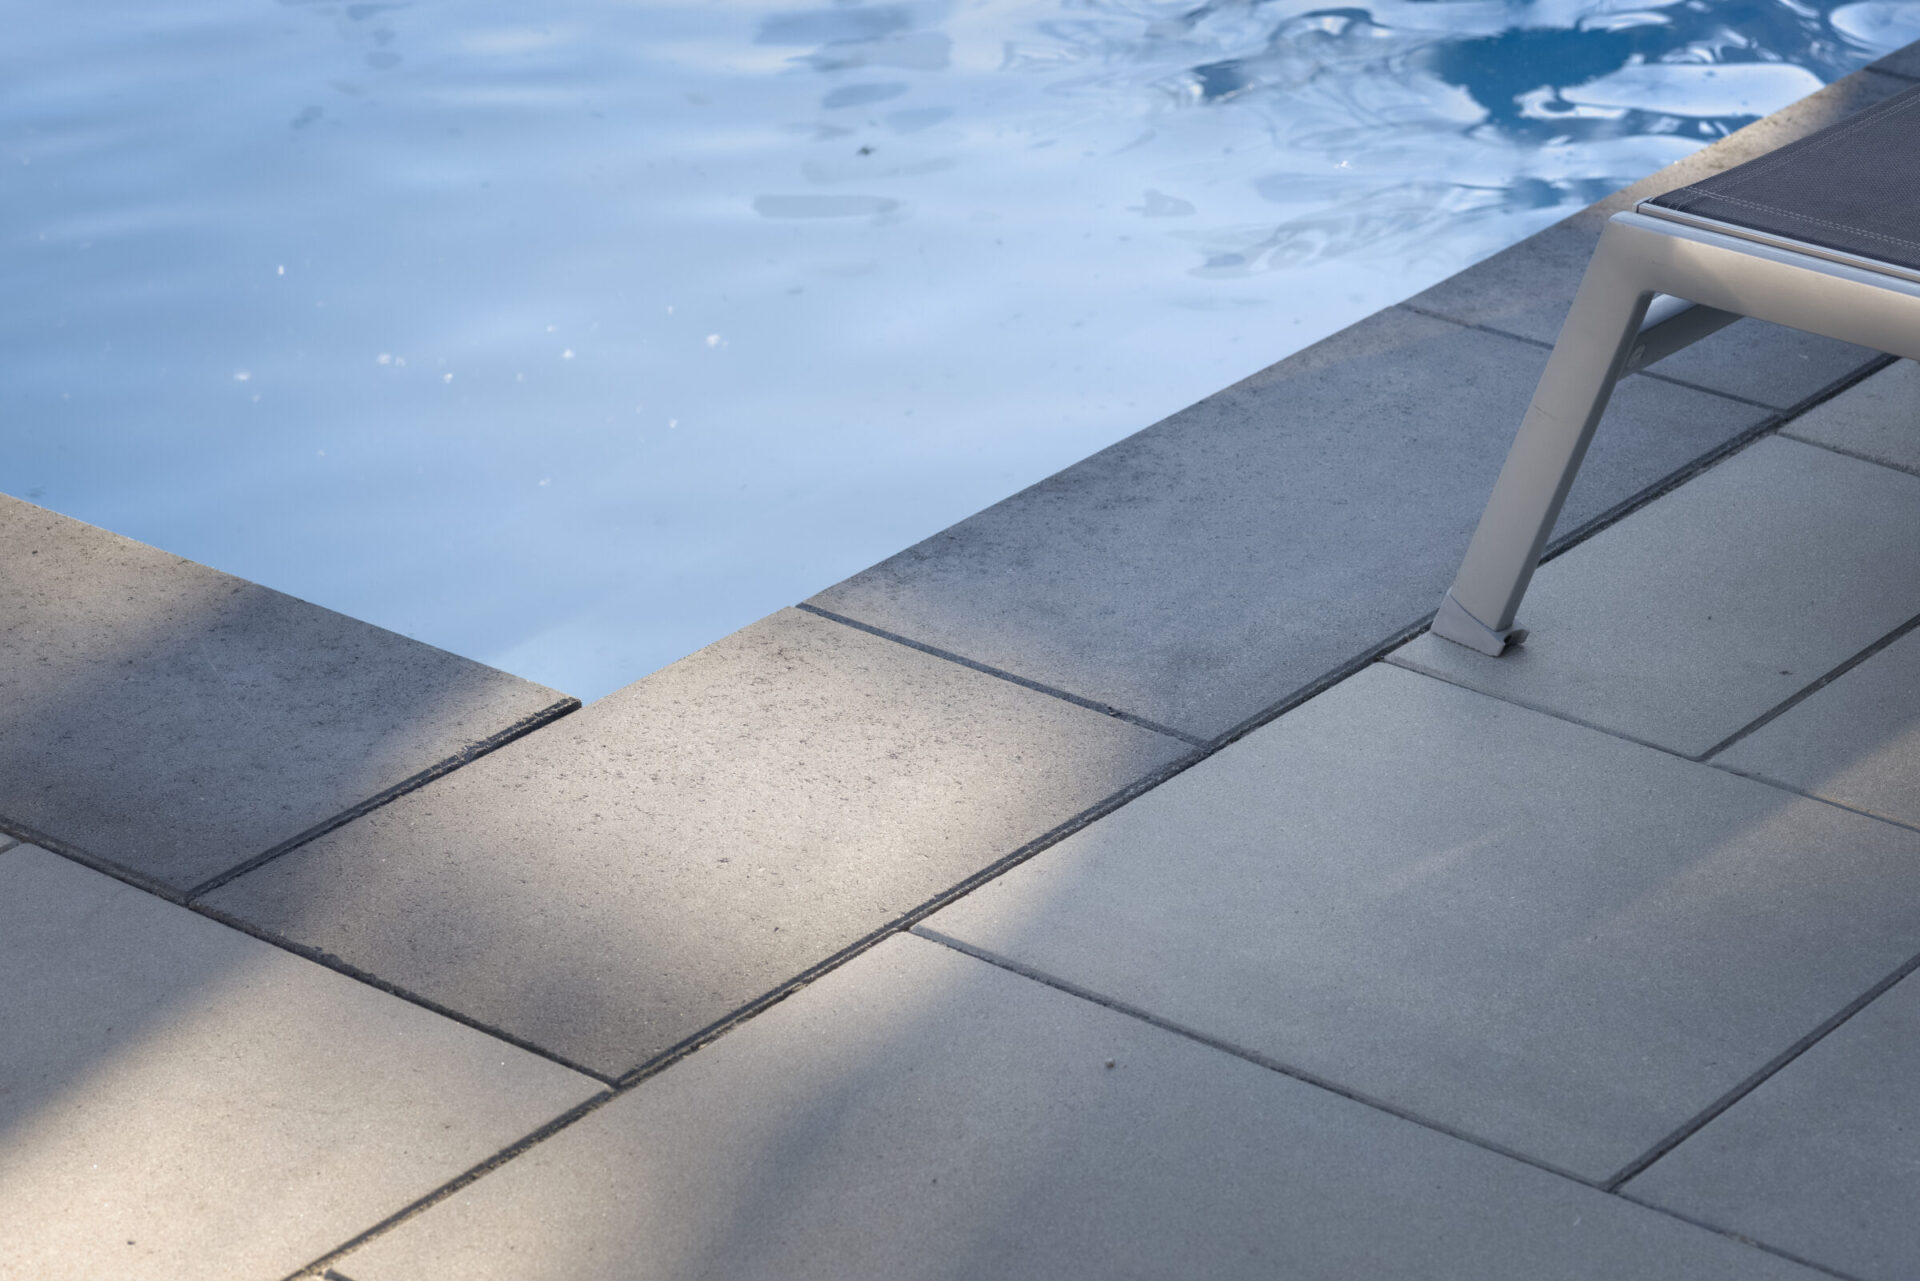 A tranquil scene showing a swimming pool edge with part of a sun lounger visible, clear water with gentle ripples, and a tiled deck.